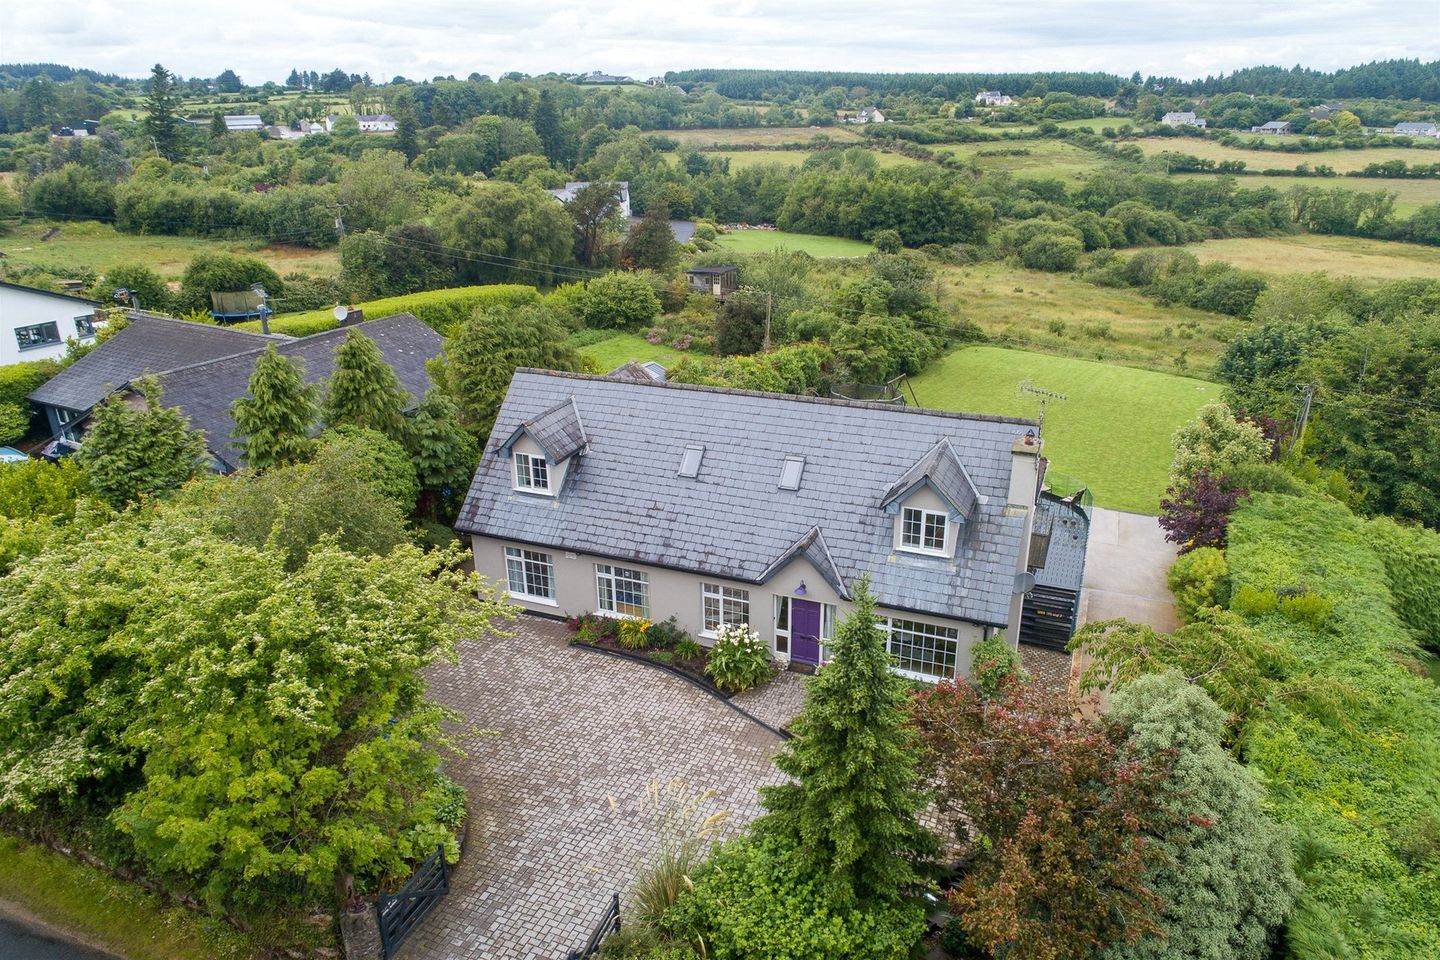 Cool Mount House, Coolree, Co. Wexford